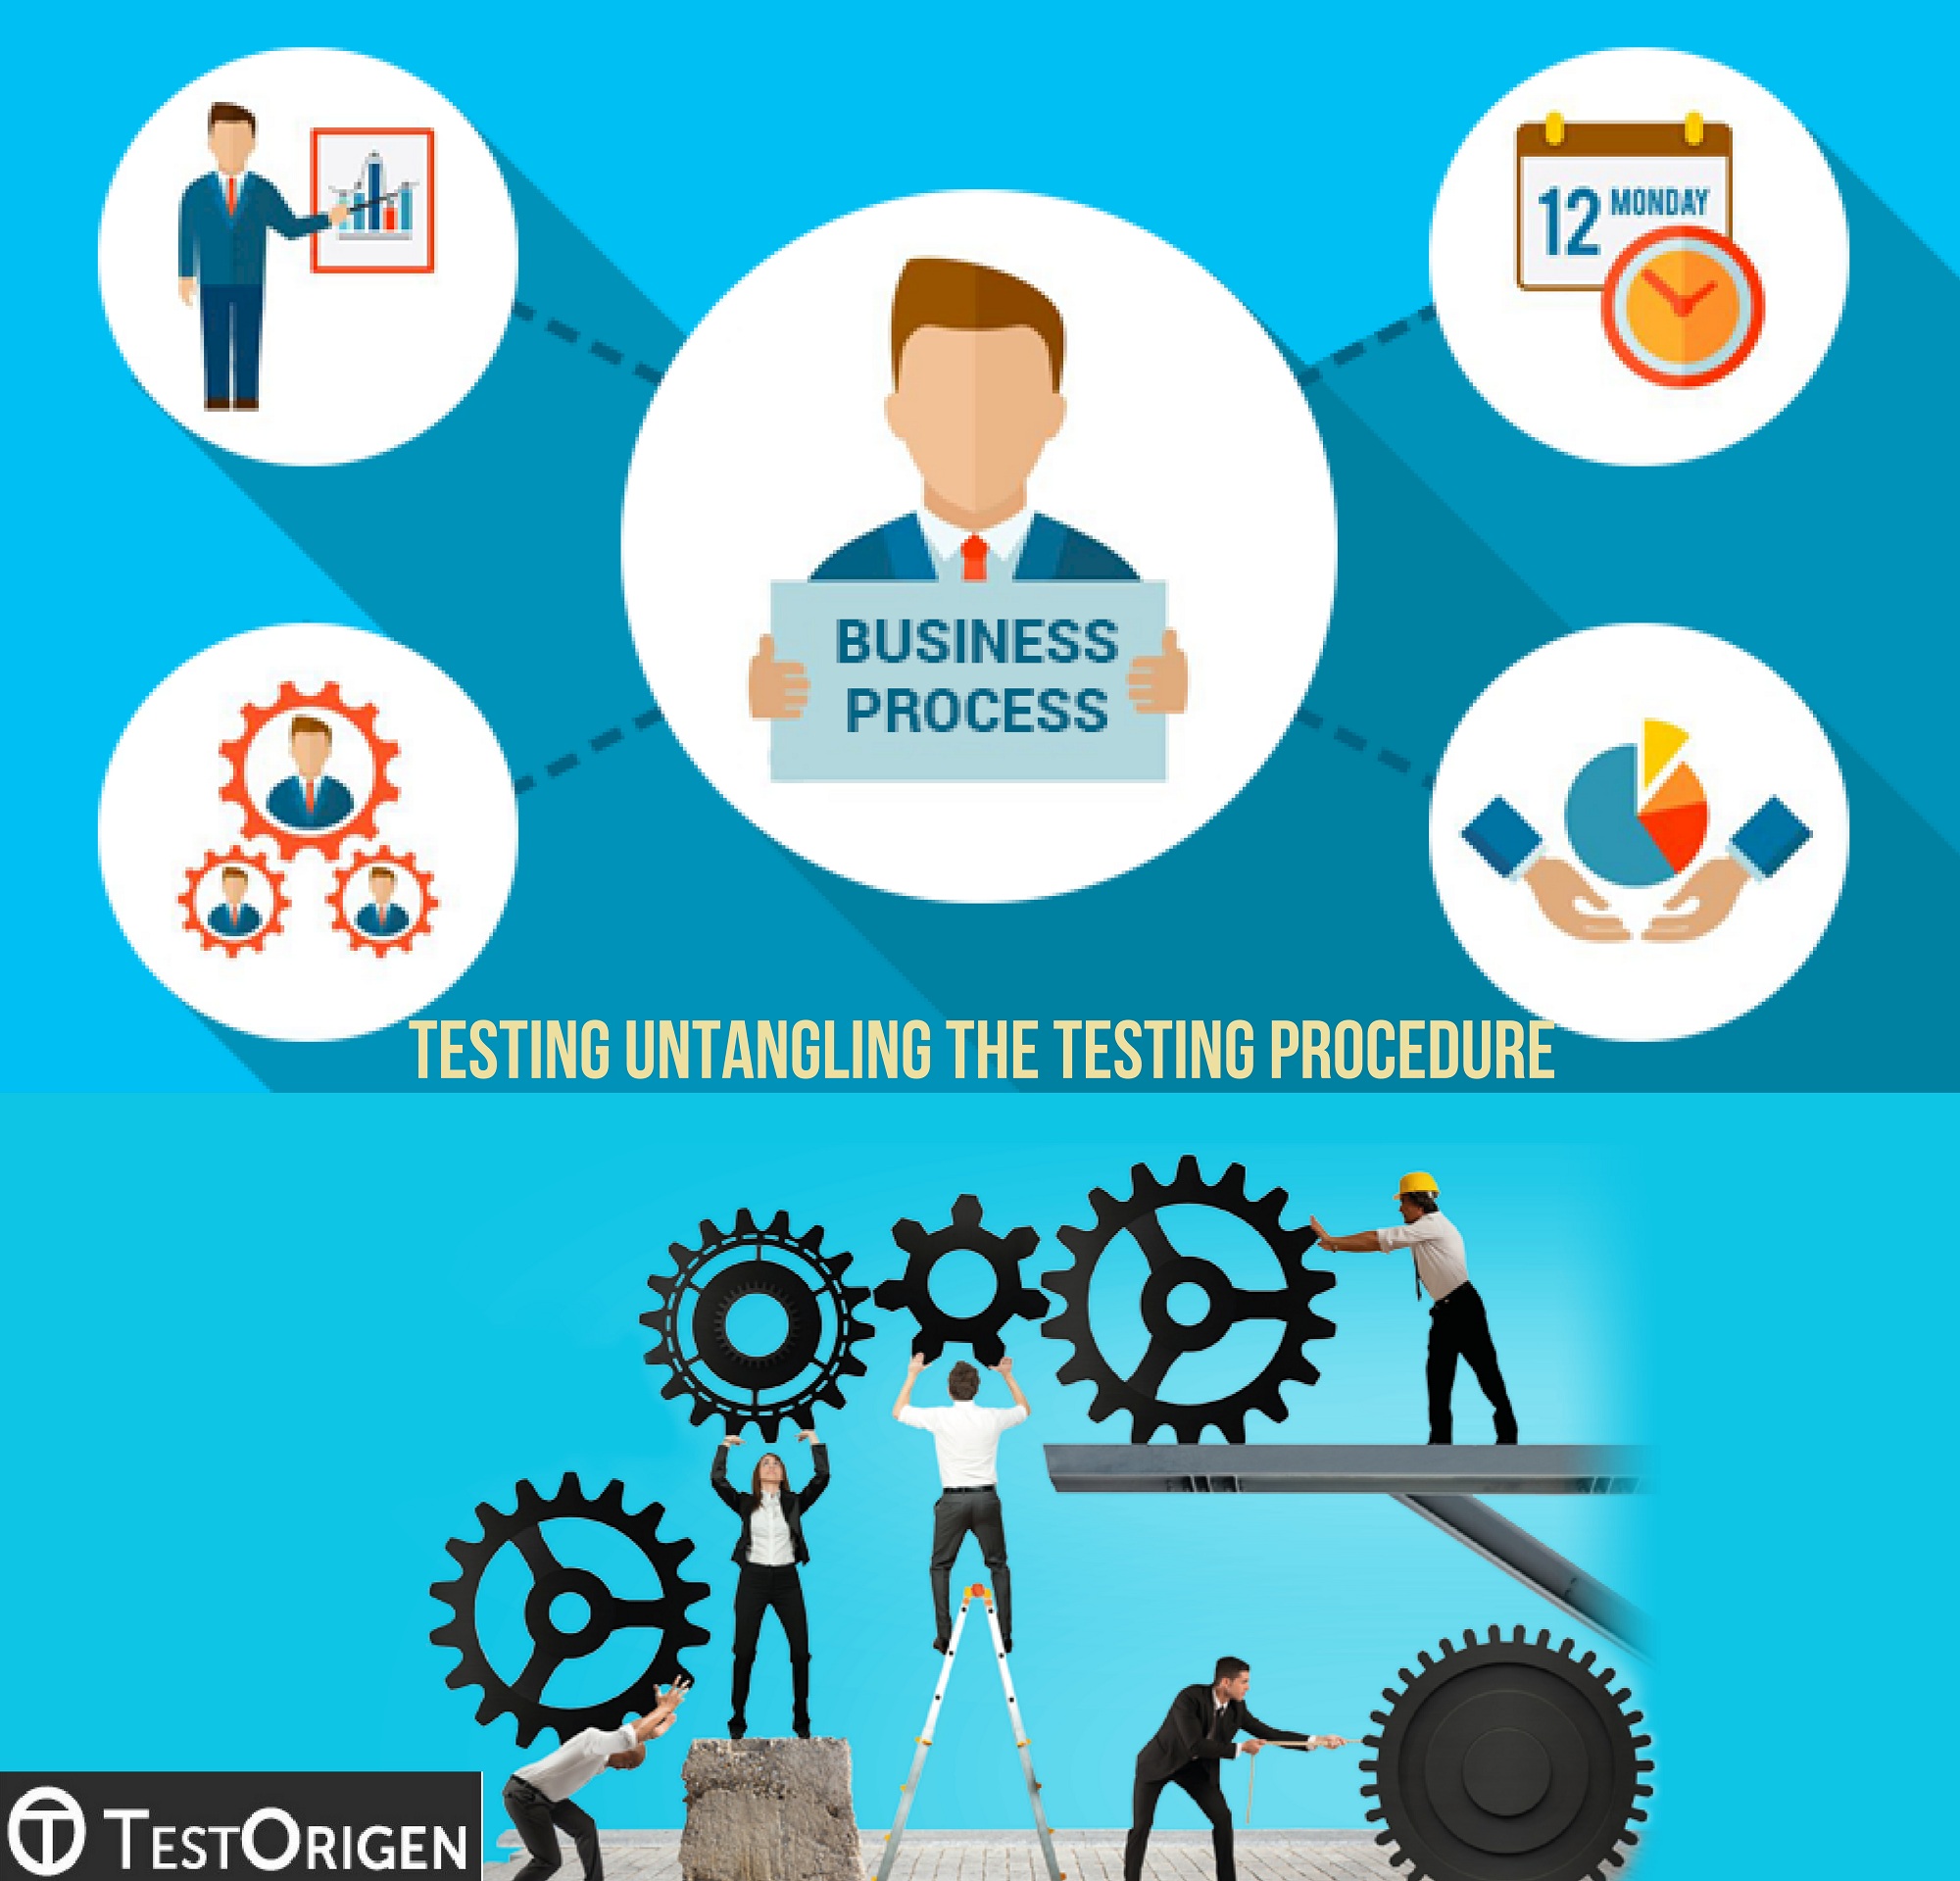 Business Process Testing Untangling The Testing Procedure